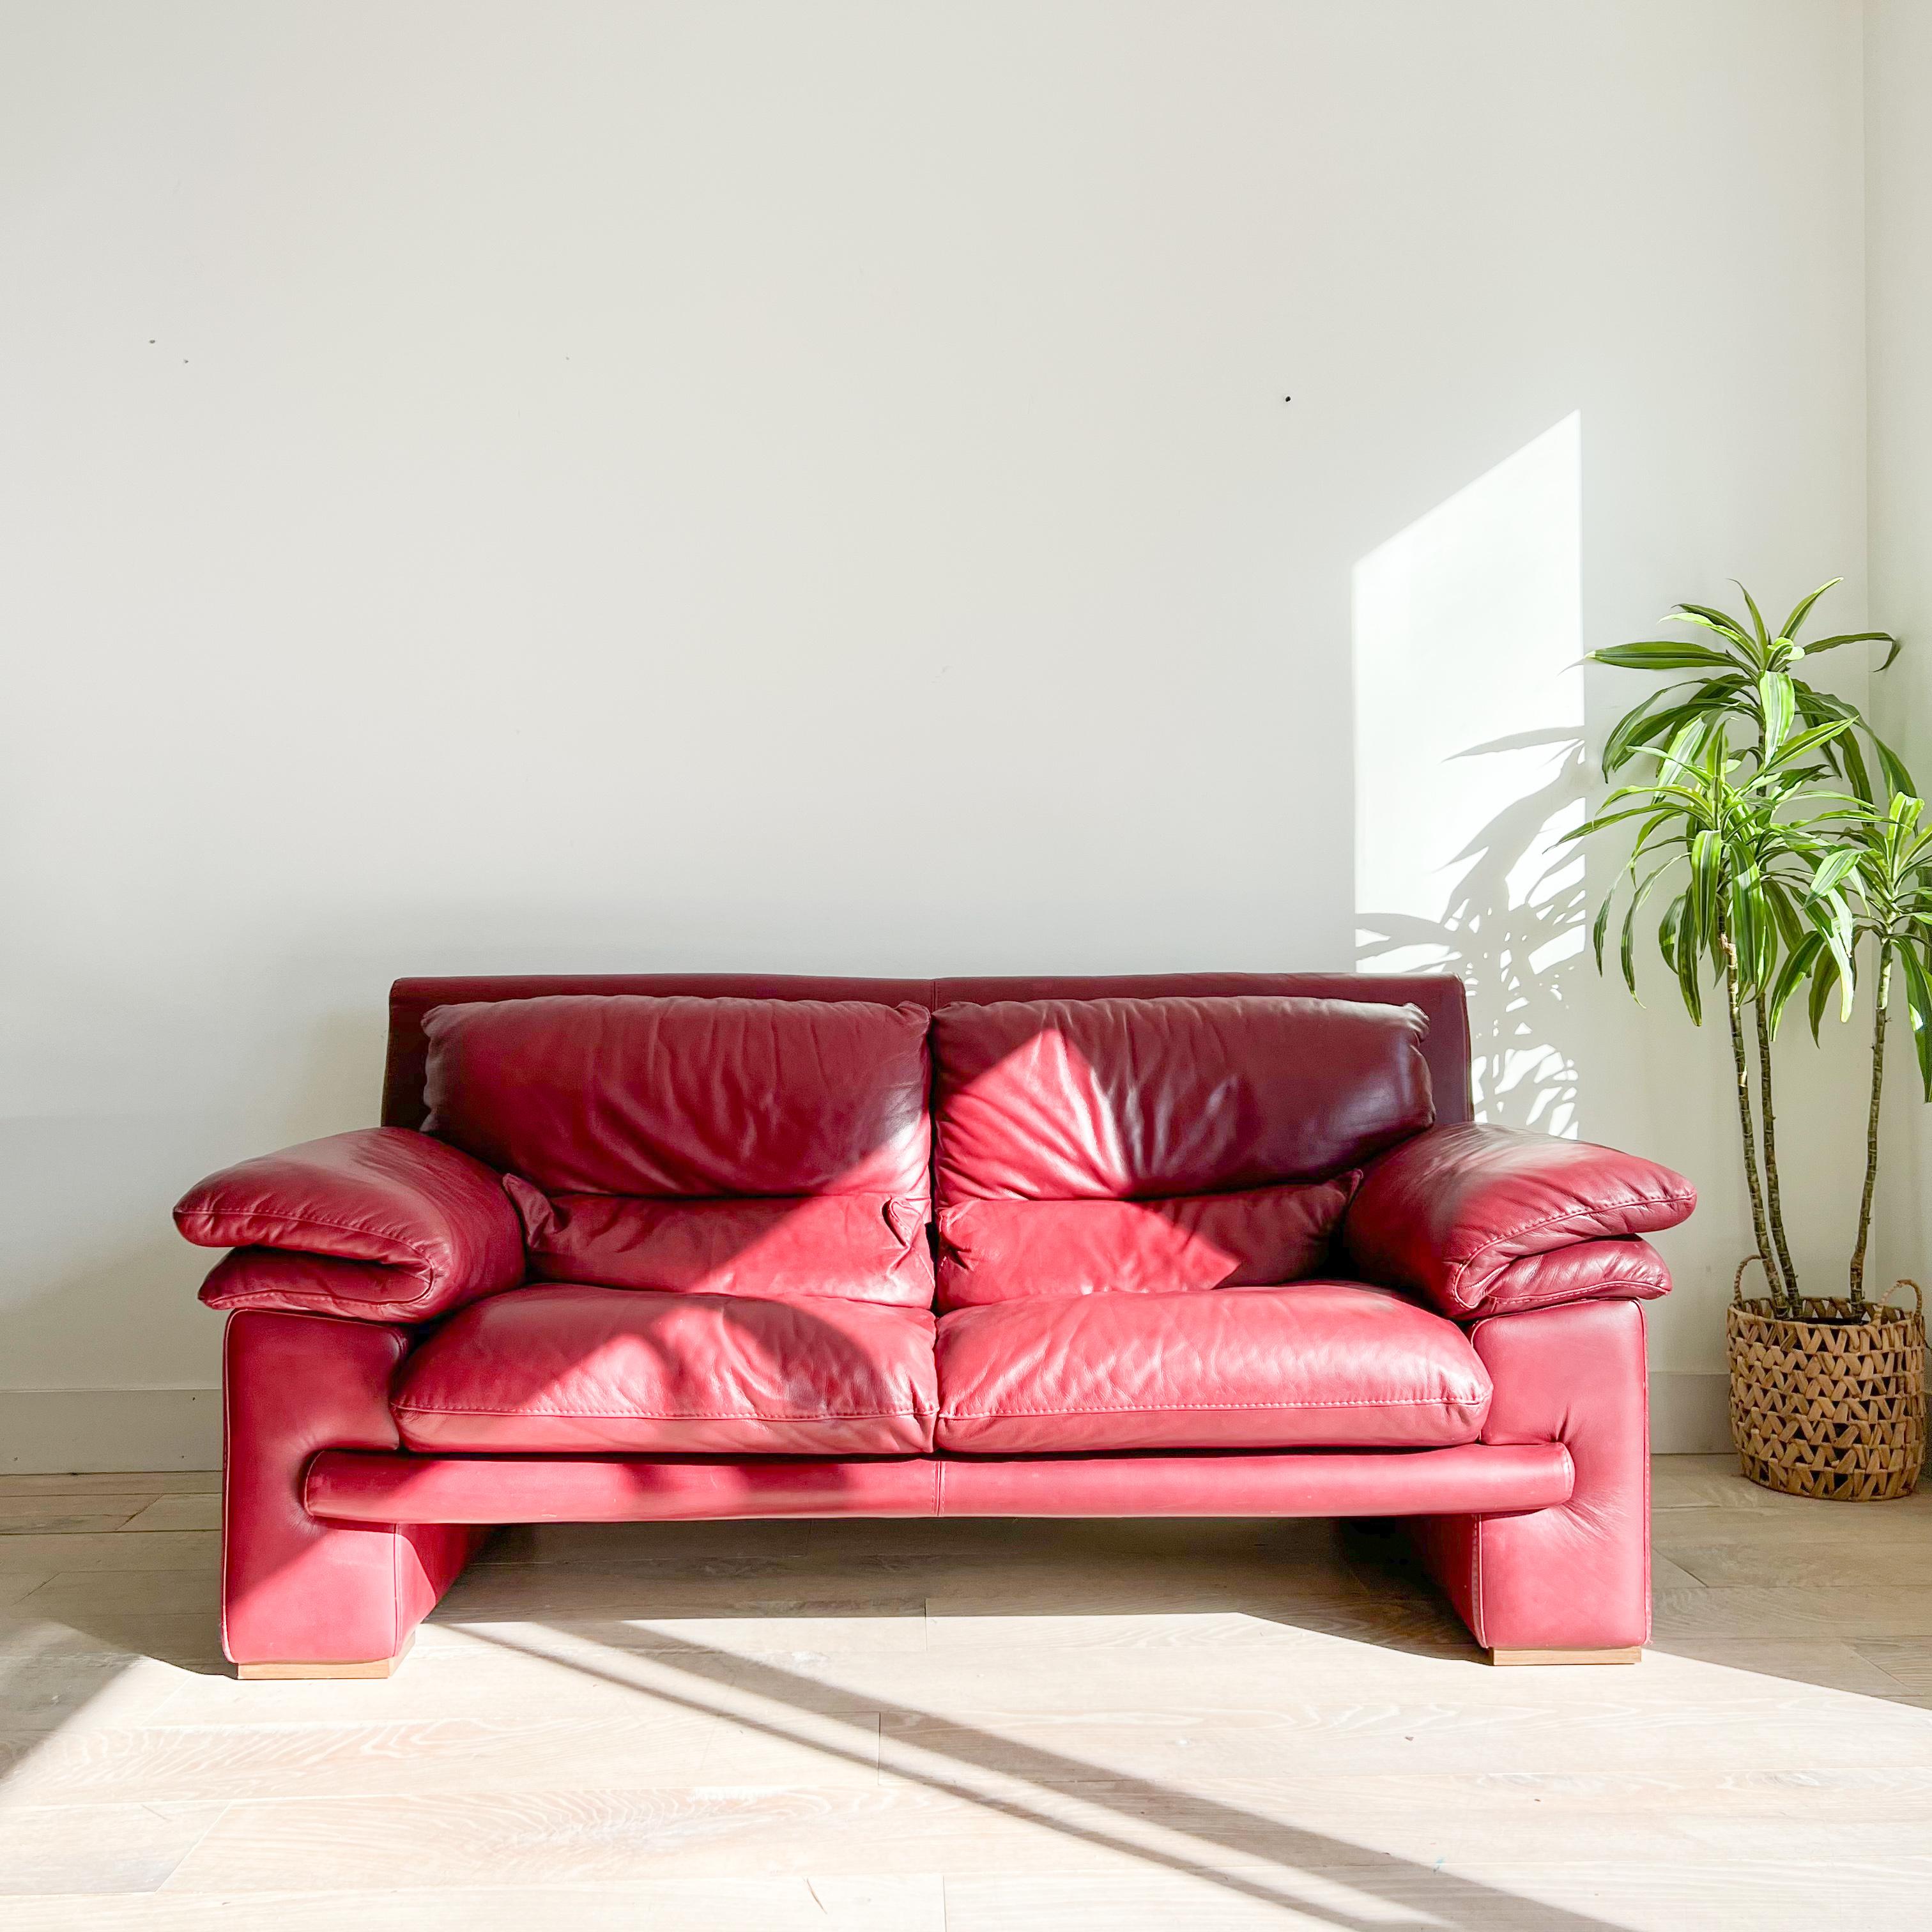 Elevate your living space with this exquisite postmodern Nicoletti dark red leather sofa, expertly crafted in Italy. Boasting timeless elegance and superior comfort, this sofa is sure to become the focal point of any room.

The rich dark red leather